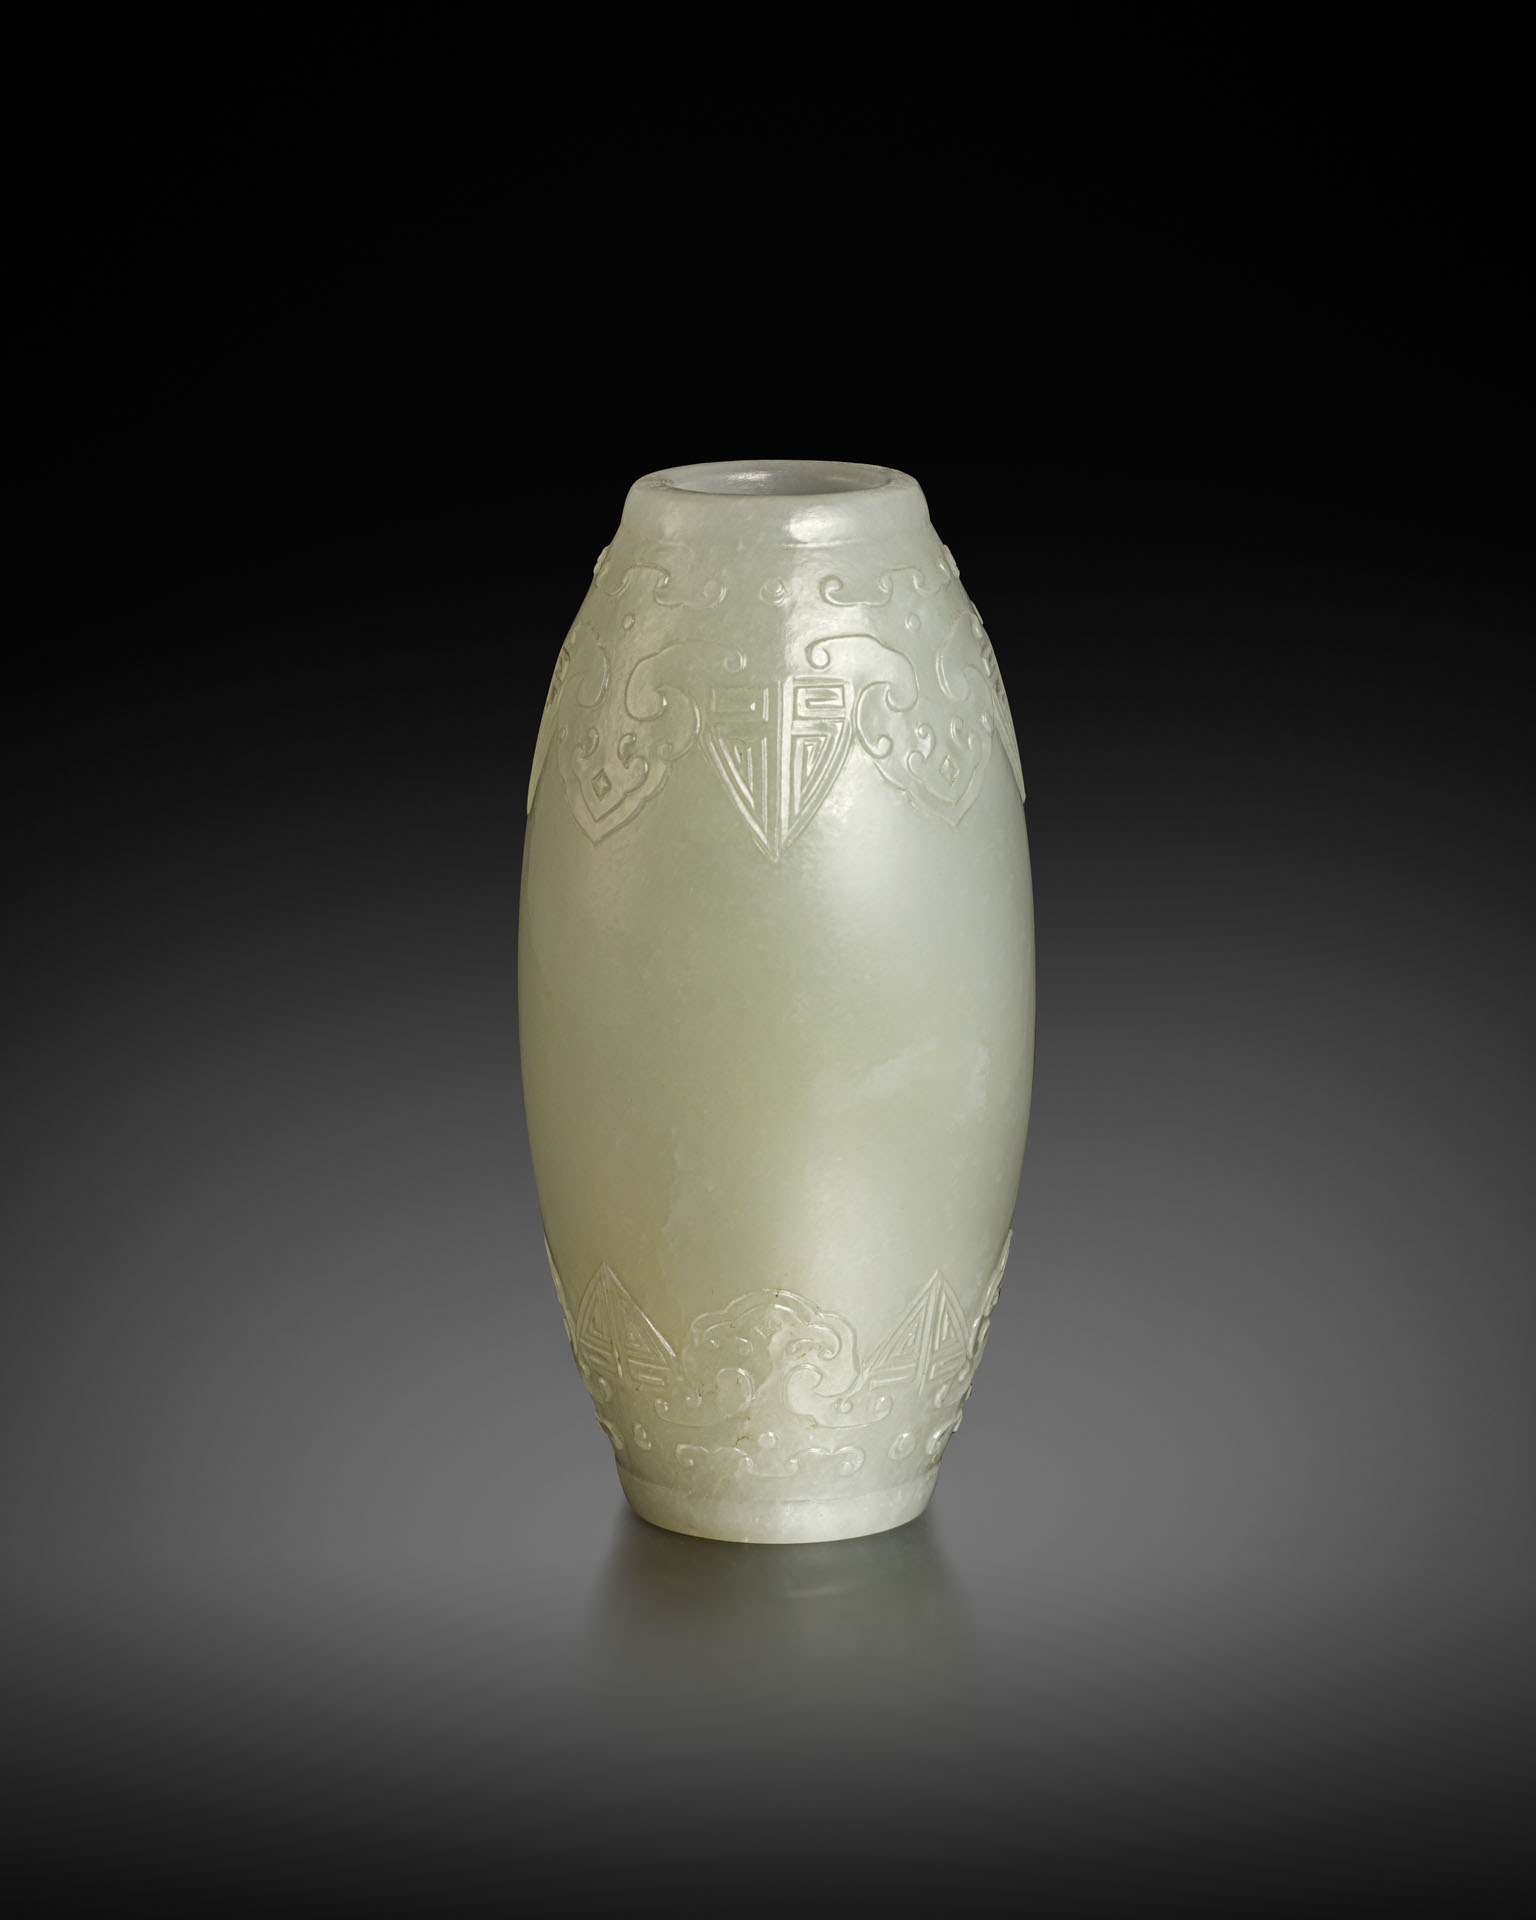 A FINE AND RARE CHINESE WHITE JADE BARREL-SHAPED VASE